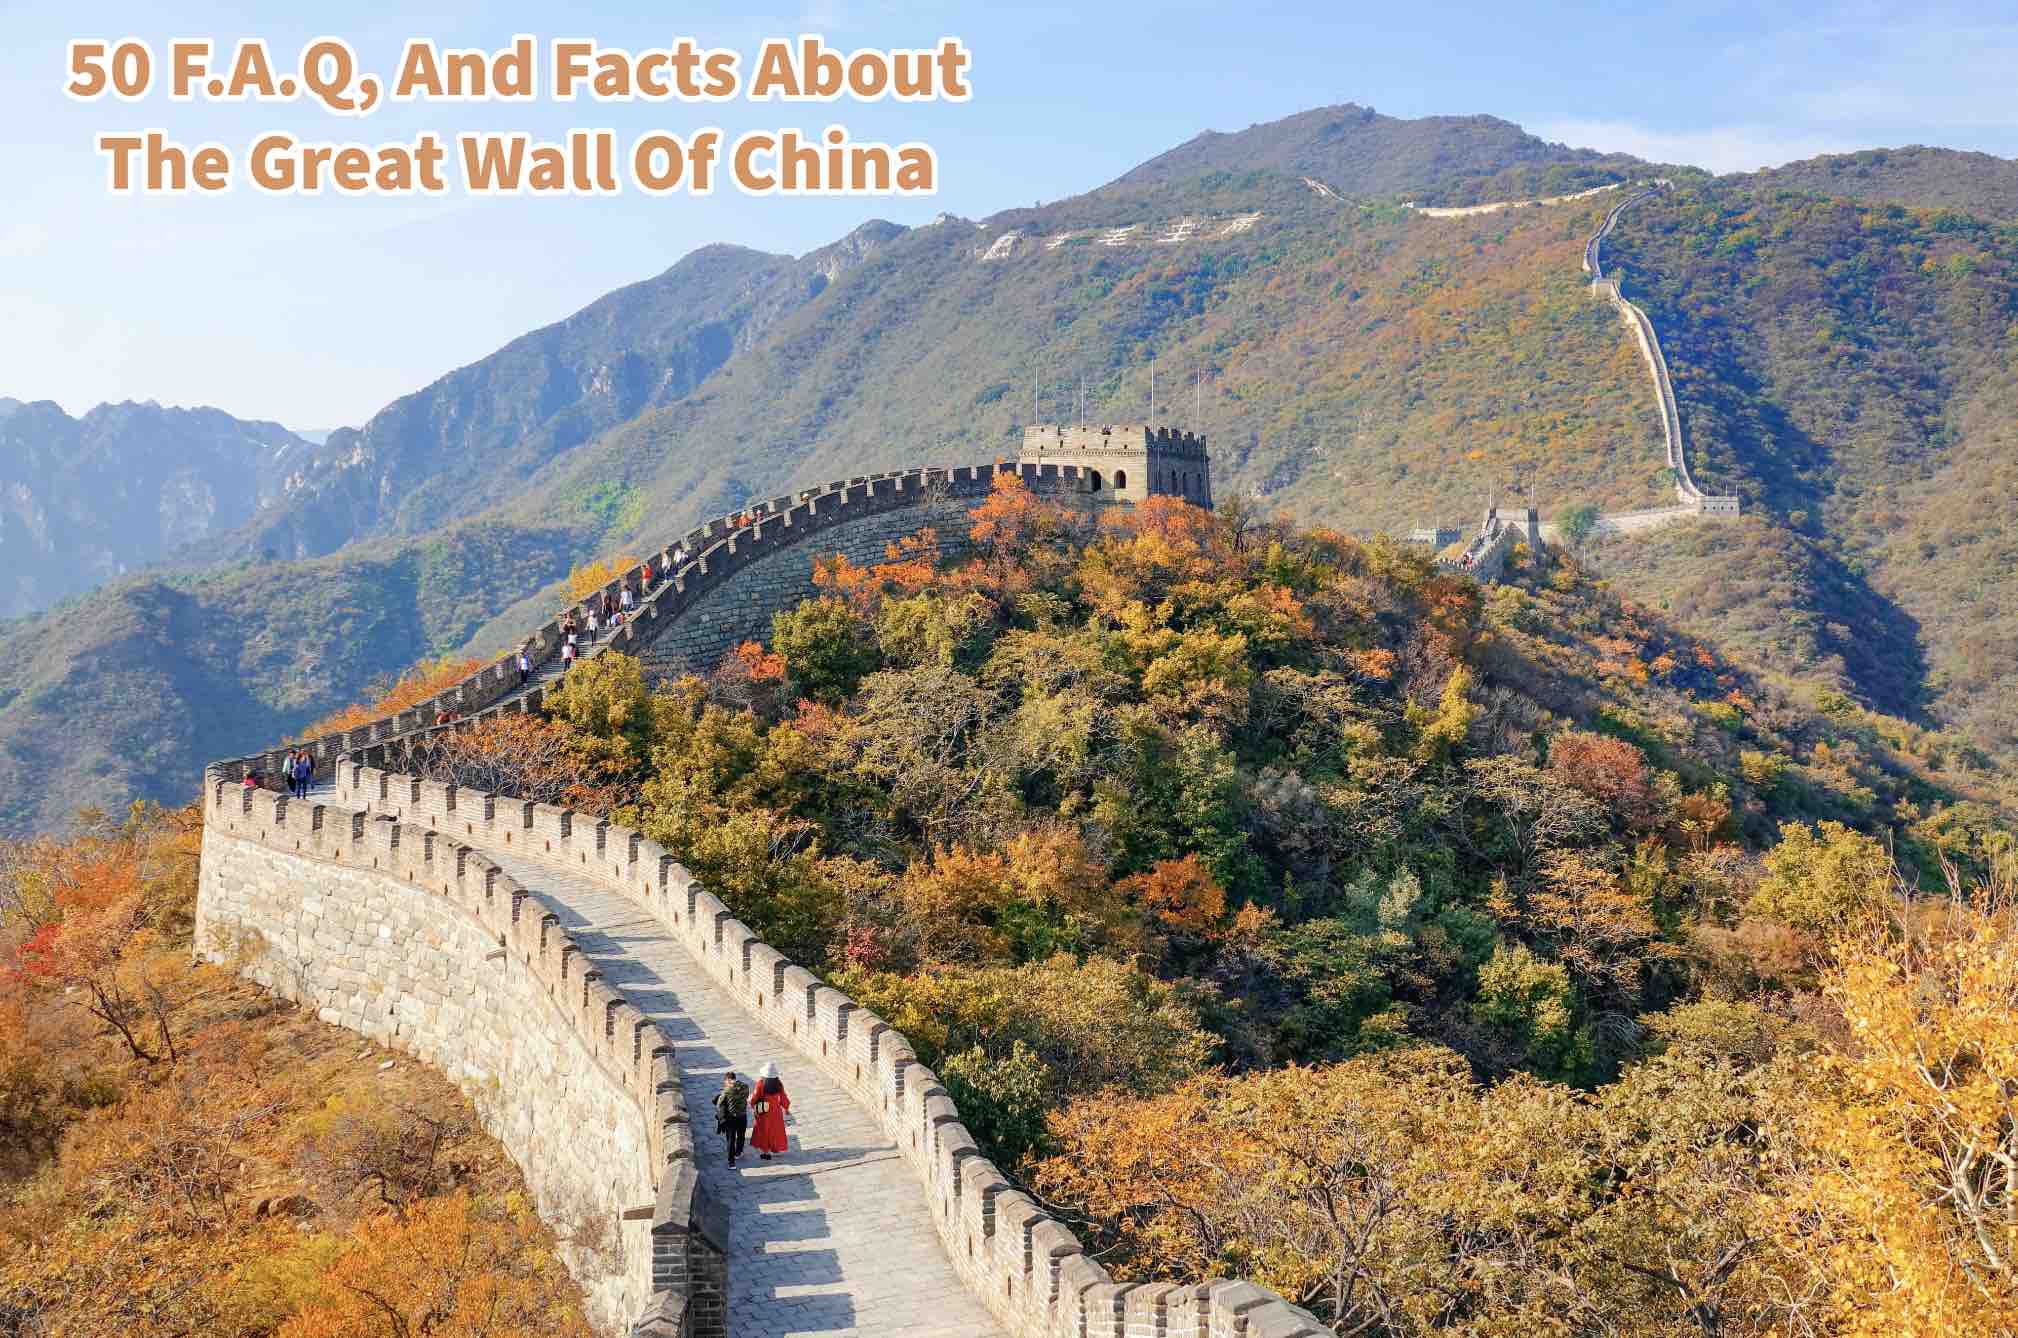 50 F.A.Q, And Facts About The Great Wall Of China